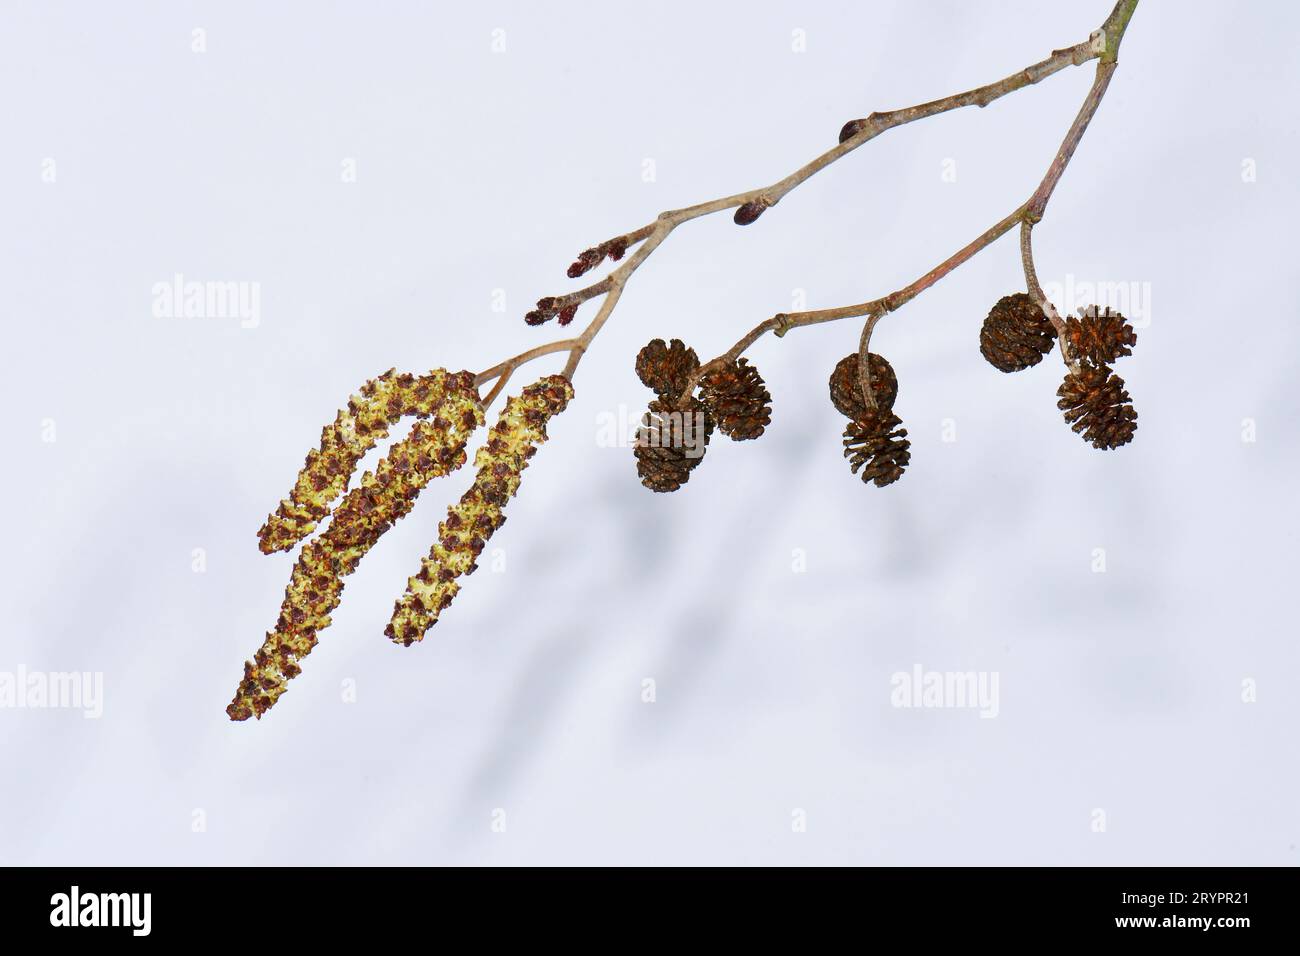 Common Alder, European Alder (Alnus glutinosa). Twig with ripe fruit, leaf buds and female and male catkins. Germany Stock Photo